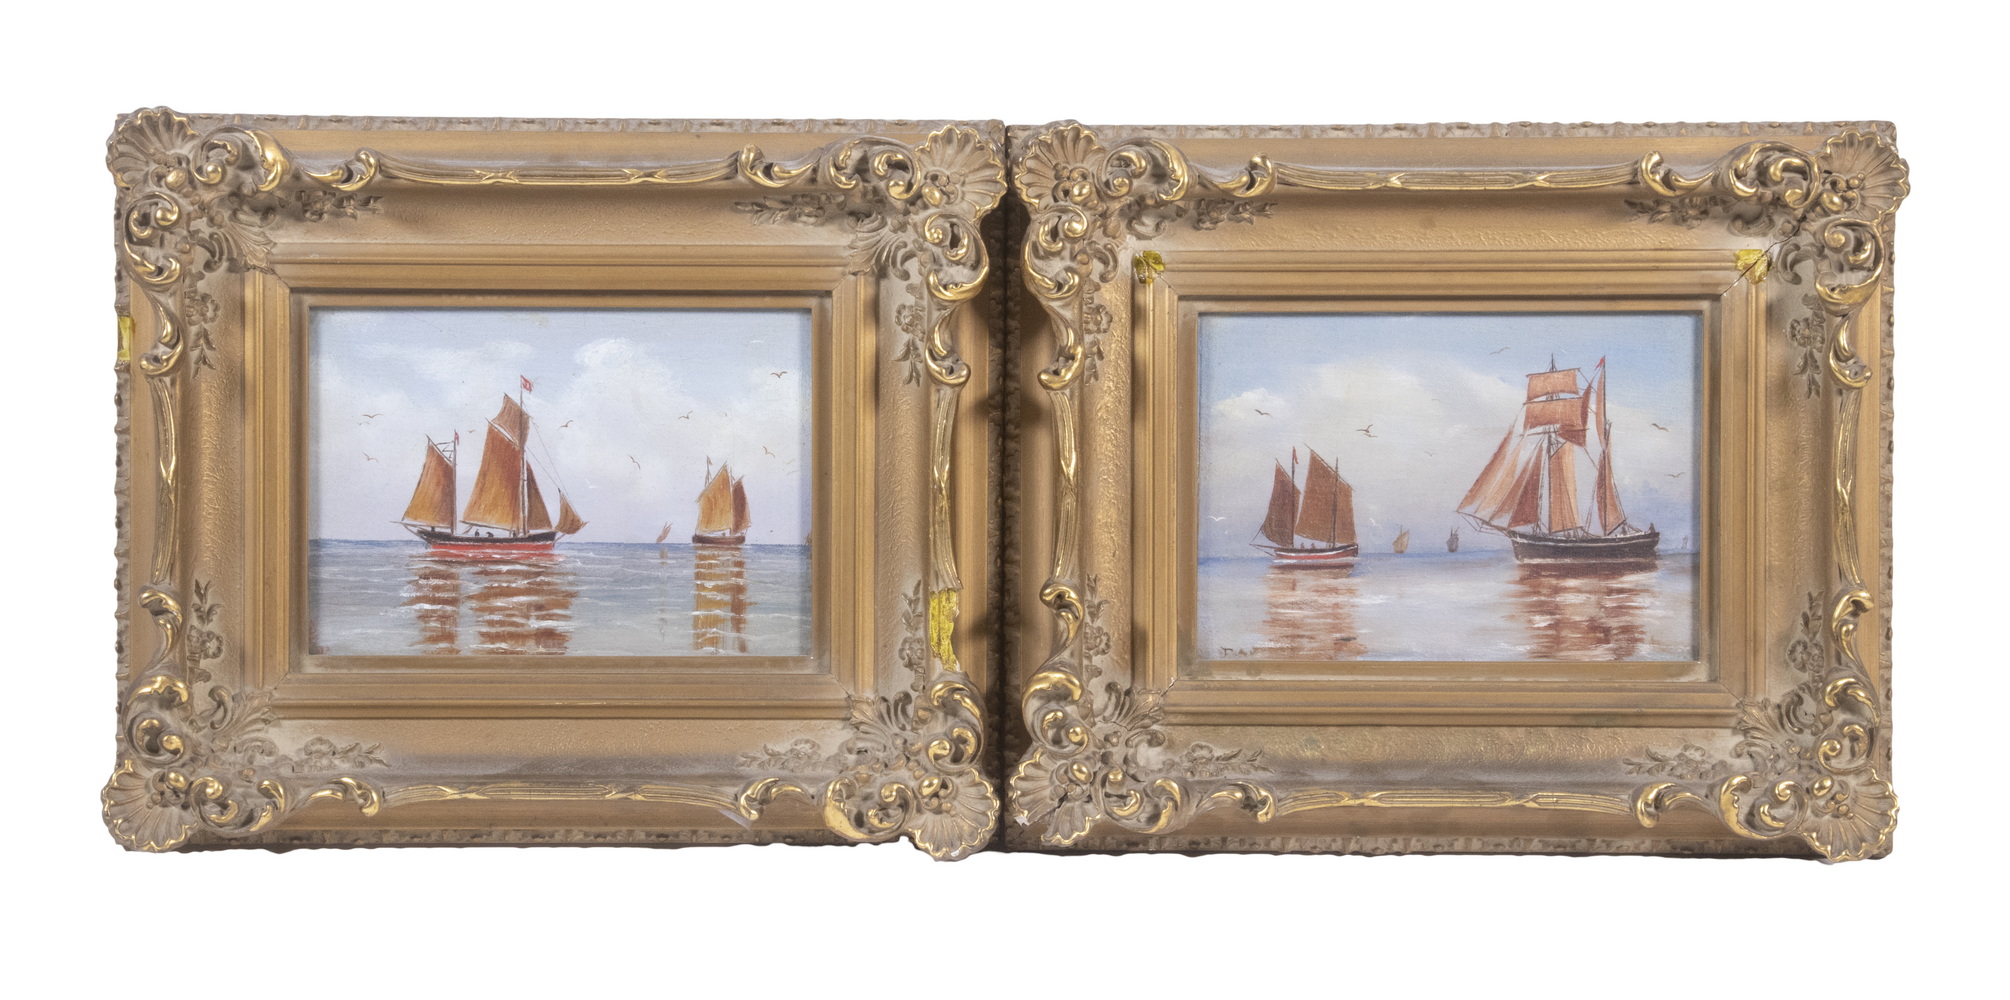 PAIR OF SMALL MARITIME OIL PAINTINGS